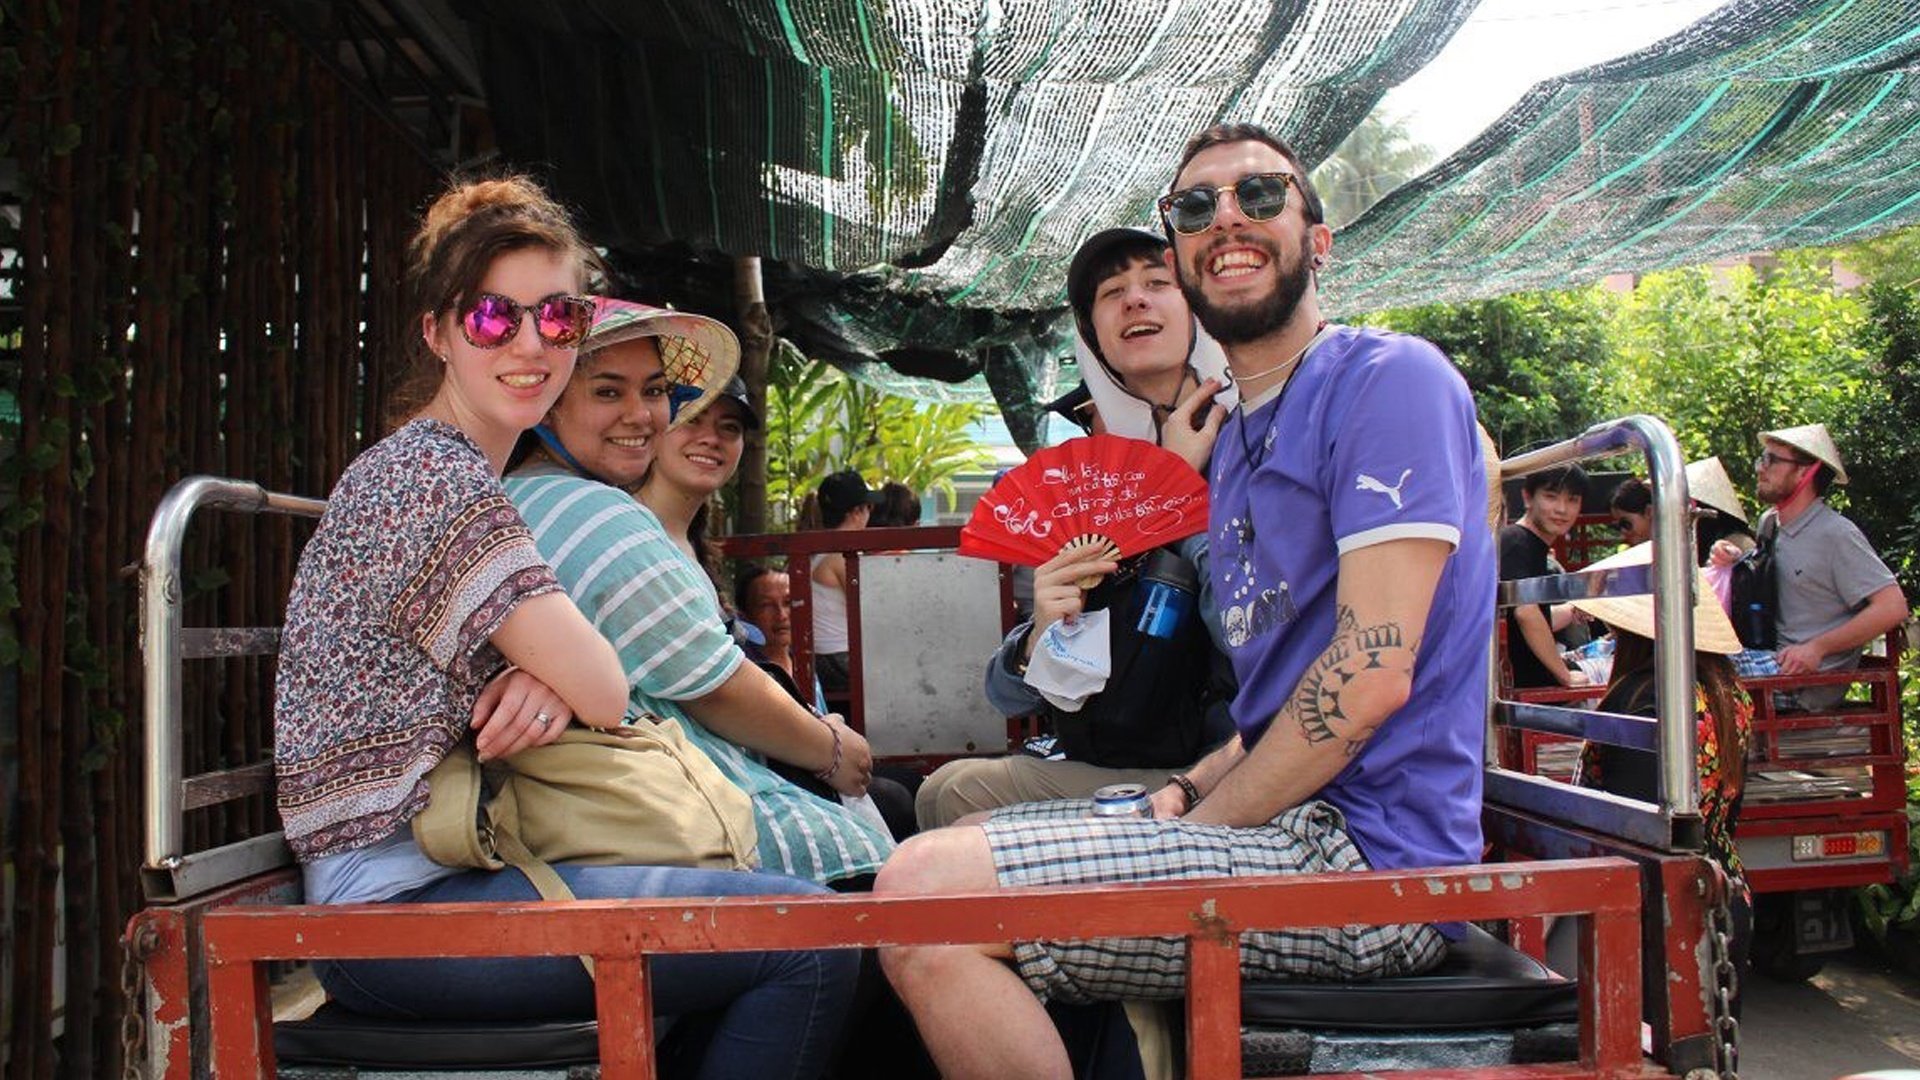 Julia and other JWU students taking a cart ride in Vietnam.